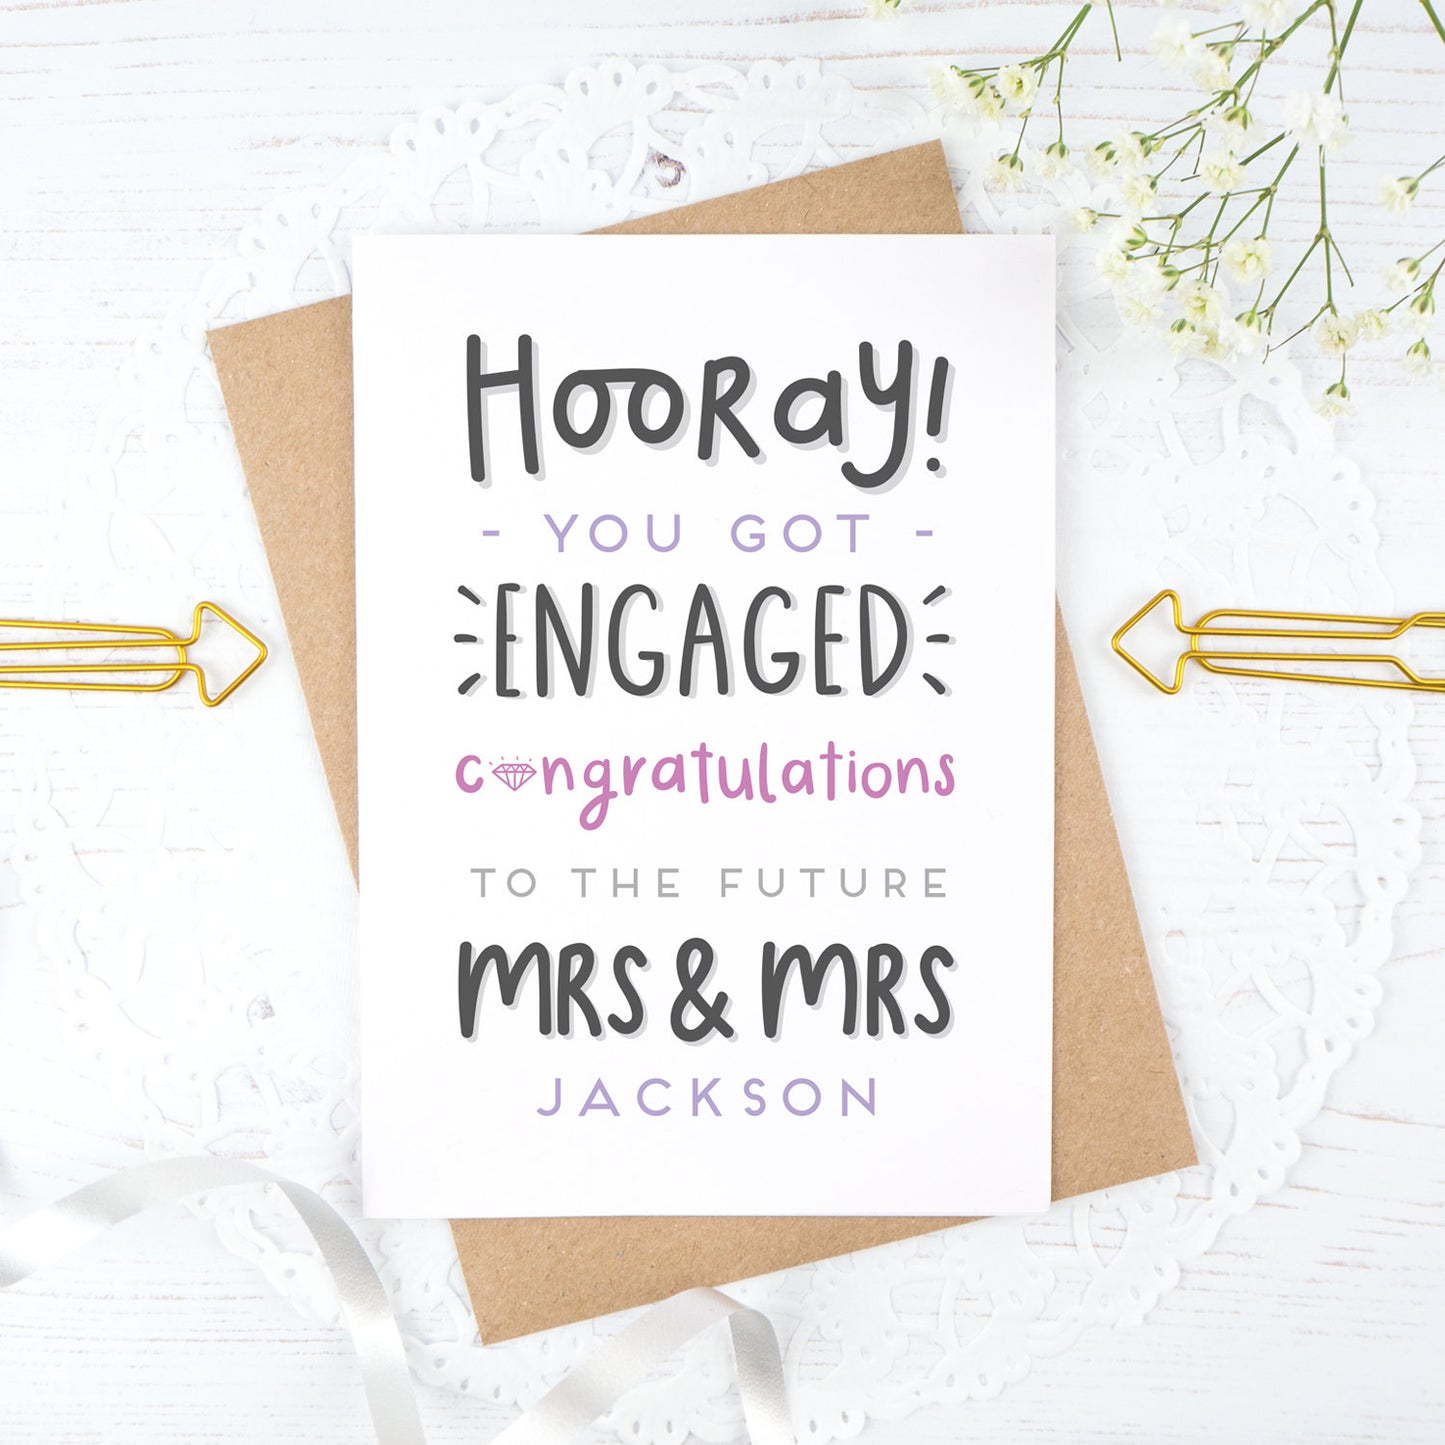 Hooray you got engaged! - Personalised Mrs & Mrs engagement card in purple